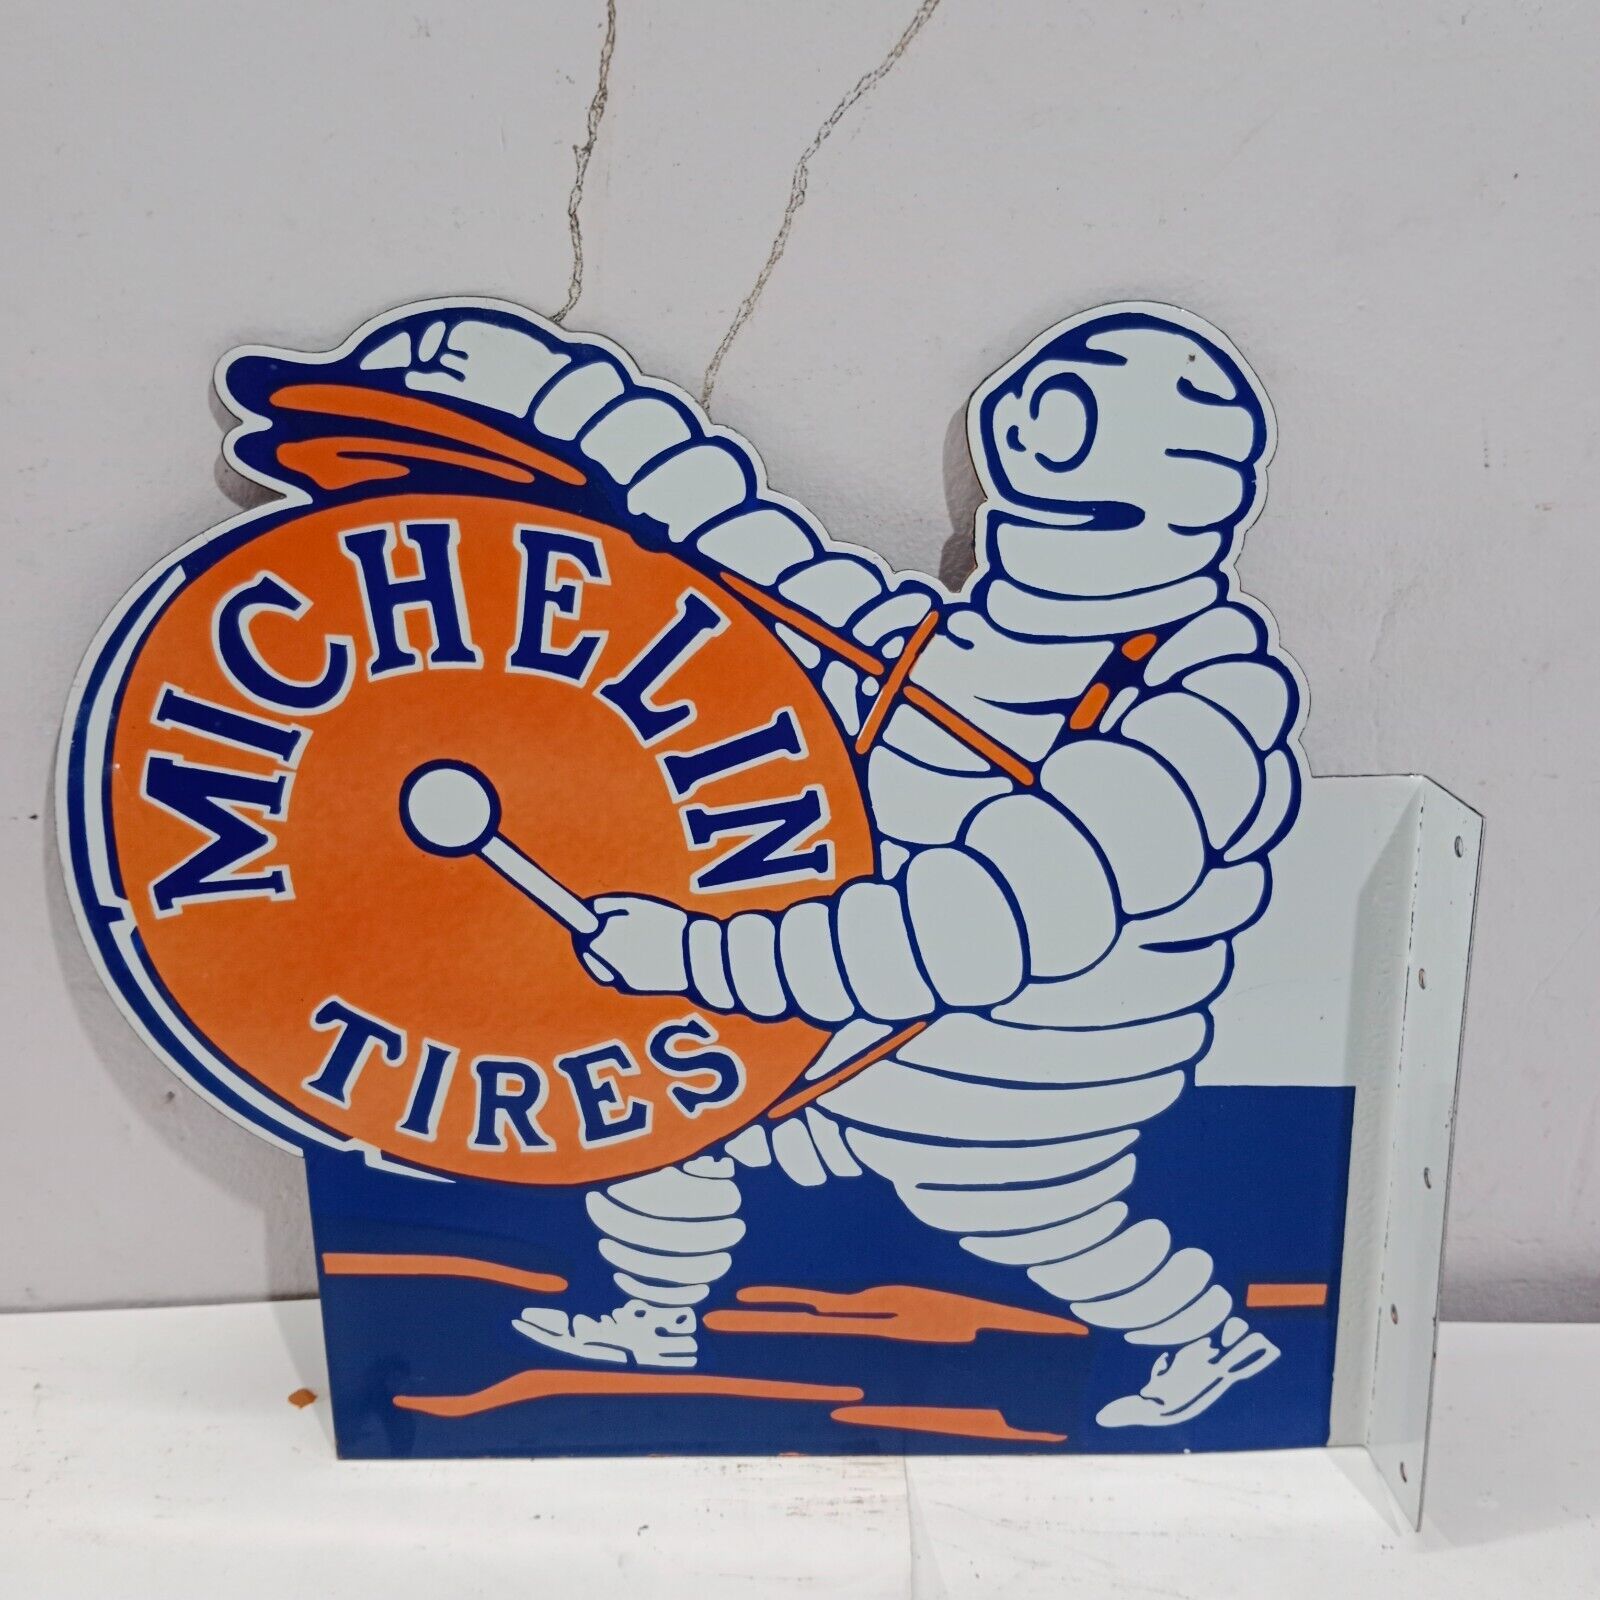 Michelin Tires Porcelain Enamel Sign  21 x 17 Inches 2 Side